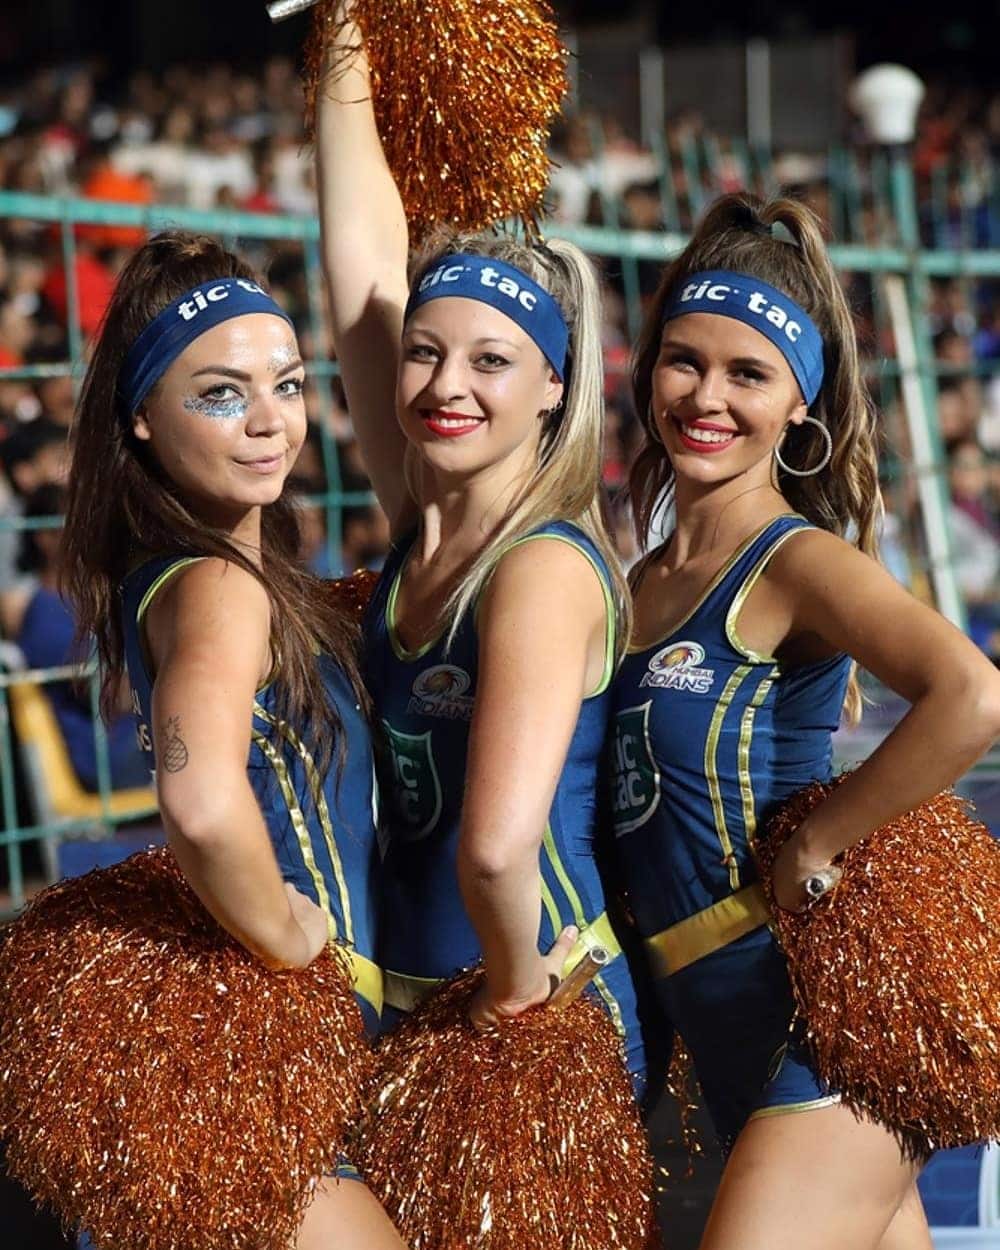 Hot And IPL Cheerleaders Who Light up The Venues